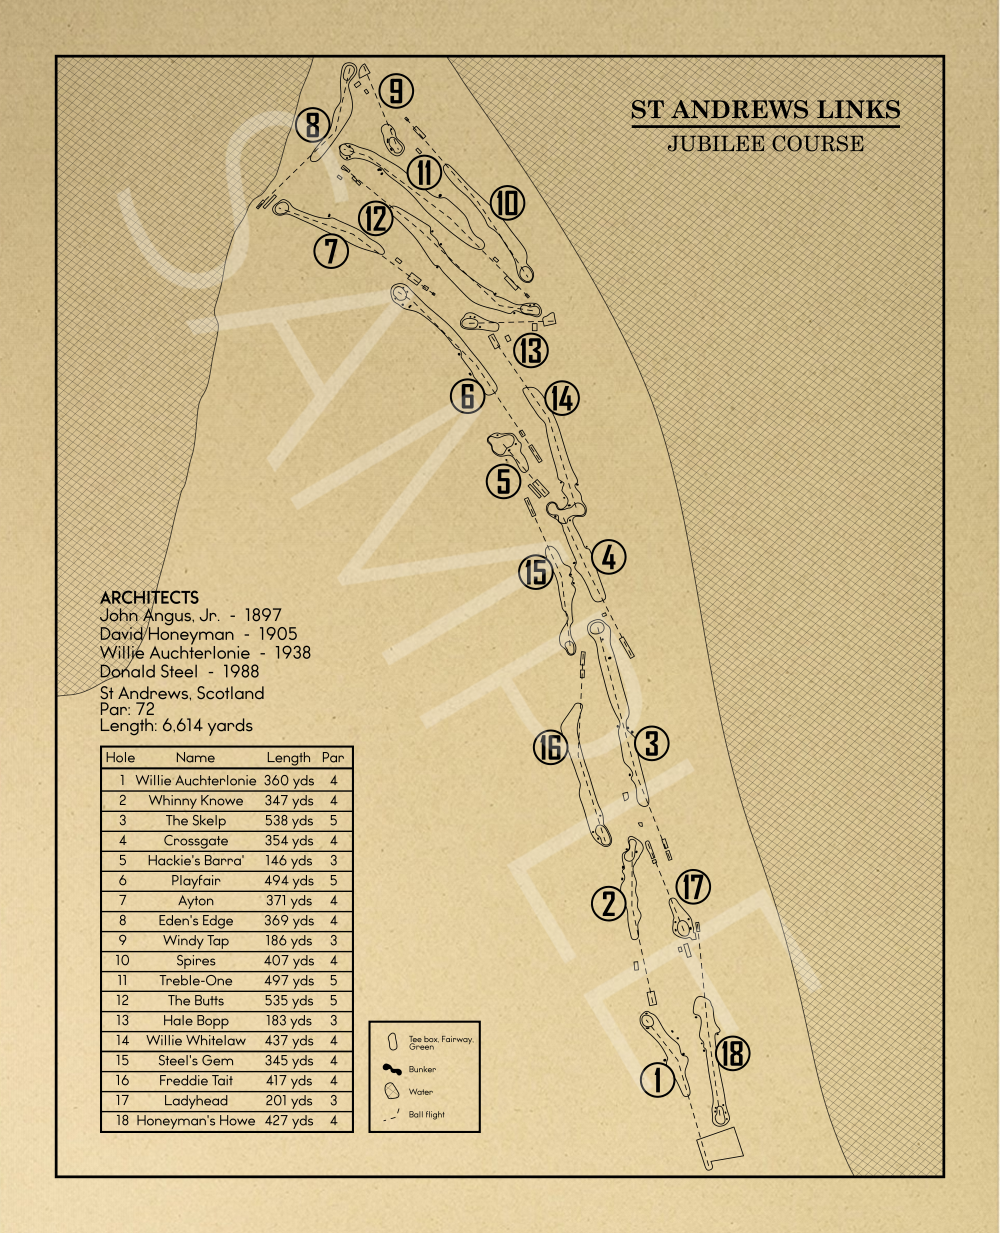 The Jubilee Course at St Andrews Links Outline (Print)